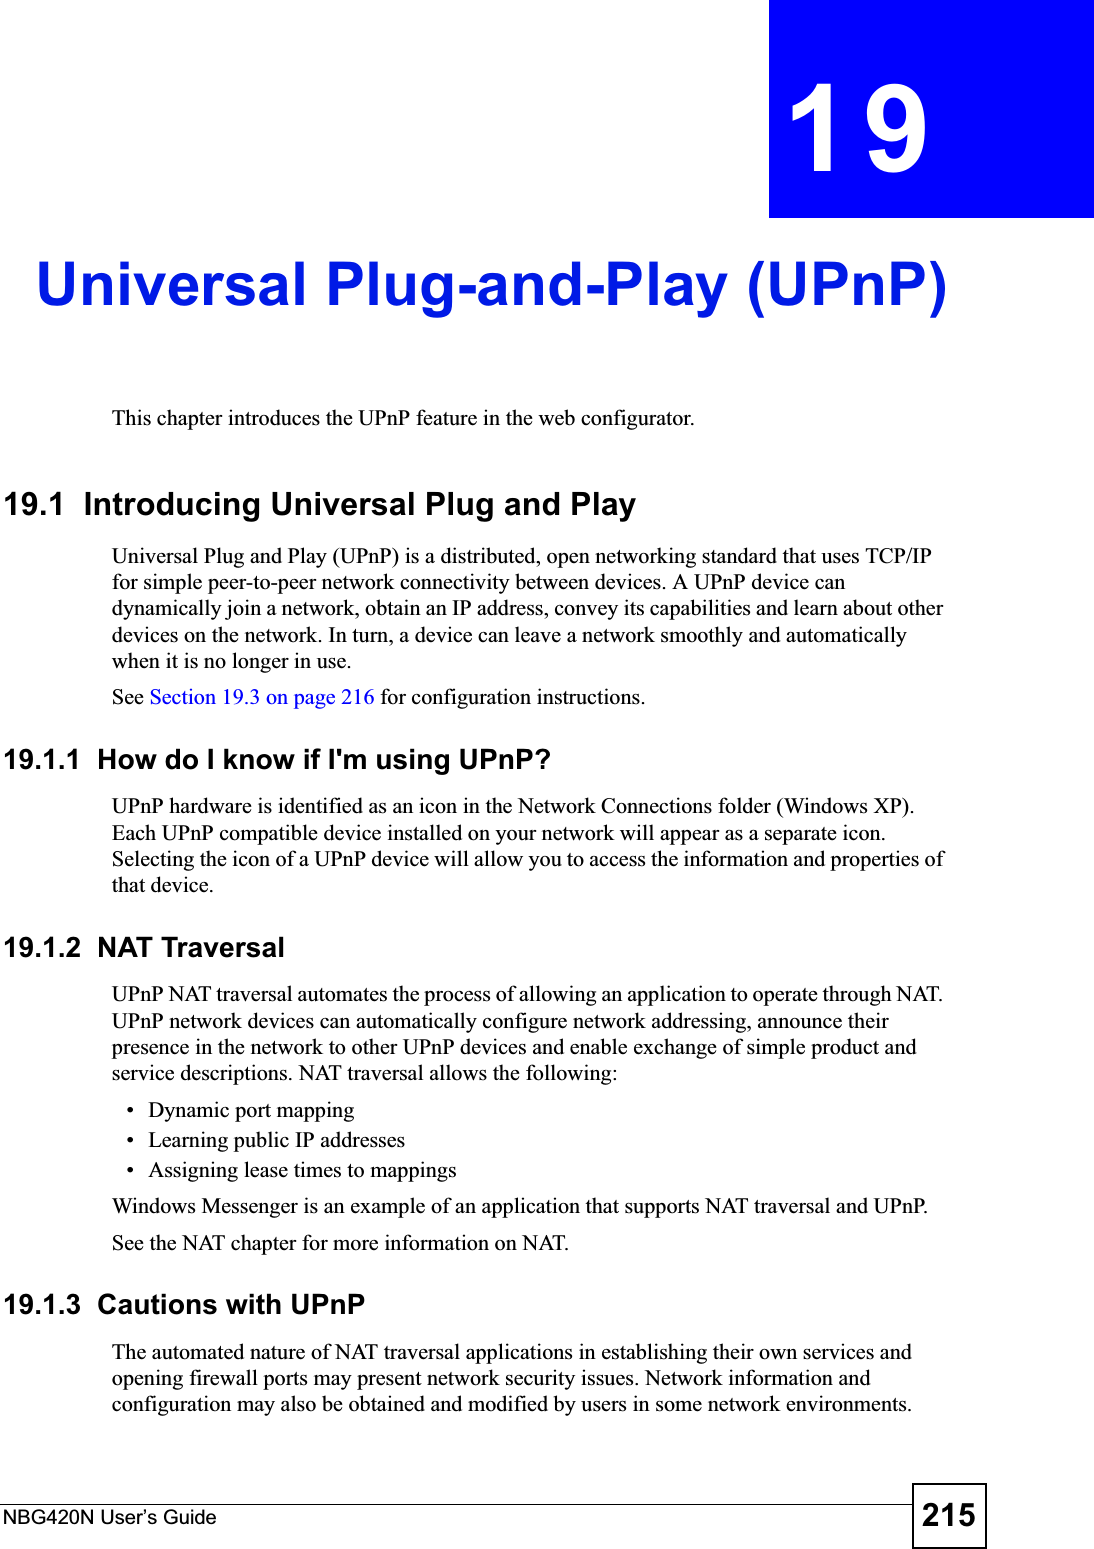 NBG420N User’s Guide 215CHAPTER 19Universal Plug-and-Play (UPnP)This chapter introduces the UPnP feature in the web configurator.19.1  Introducing Universal Plug and Play Universal Plug and Play (UPnP) is a distributed, open networking standard that uses TCP/IP for simple peer-to-peer network connectivity between devices. A UPnP device can dynamically join a network, obtain an IP address, convey its capabilities and learn about other devices on the network. In turn, a device can leave a network smoothly and automatically when it is no longer in use.See Section 19.3 on page 216 for configuration instructions. 19.1.1  How do I know if I&apos;m using UPnP? UPnP hardware is identified as an icon in the Network Connections folder (Windows XP). Each UPnP compatible device installed on your network will appear as a separate icon. Selecting the icon of a UPnP device will allow you to access the information and properties of that device. 19.1.2  NAT TraversalUPnP NAT traversal automates the process of allowing an application to operate through NAT. UPnP network devices can automatically configure network addressing, announce their presence in the network to other UPnP devices and enable exchange of simple product and service descriptions. NAT traversal allows the following:• Dynamic port mapping• Learning public IP addresses• Assigning lease times to mappingsWindows Messenger is an example of an application that supports NAT traversal and UPnP. See the NAT chapter for more information on NAT.19.1.3  Cautions with UPnPThe automated nature of NAT traversal applications in establishing their own services and opening firewall ports may present network security issues. Network information and configuration may also be obtained and modified by users in some network environments. 